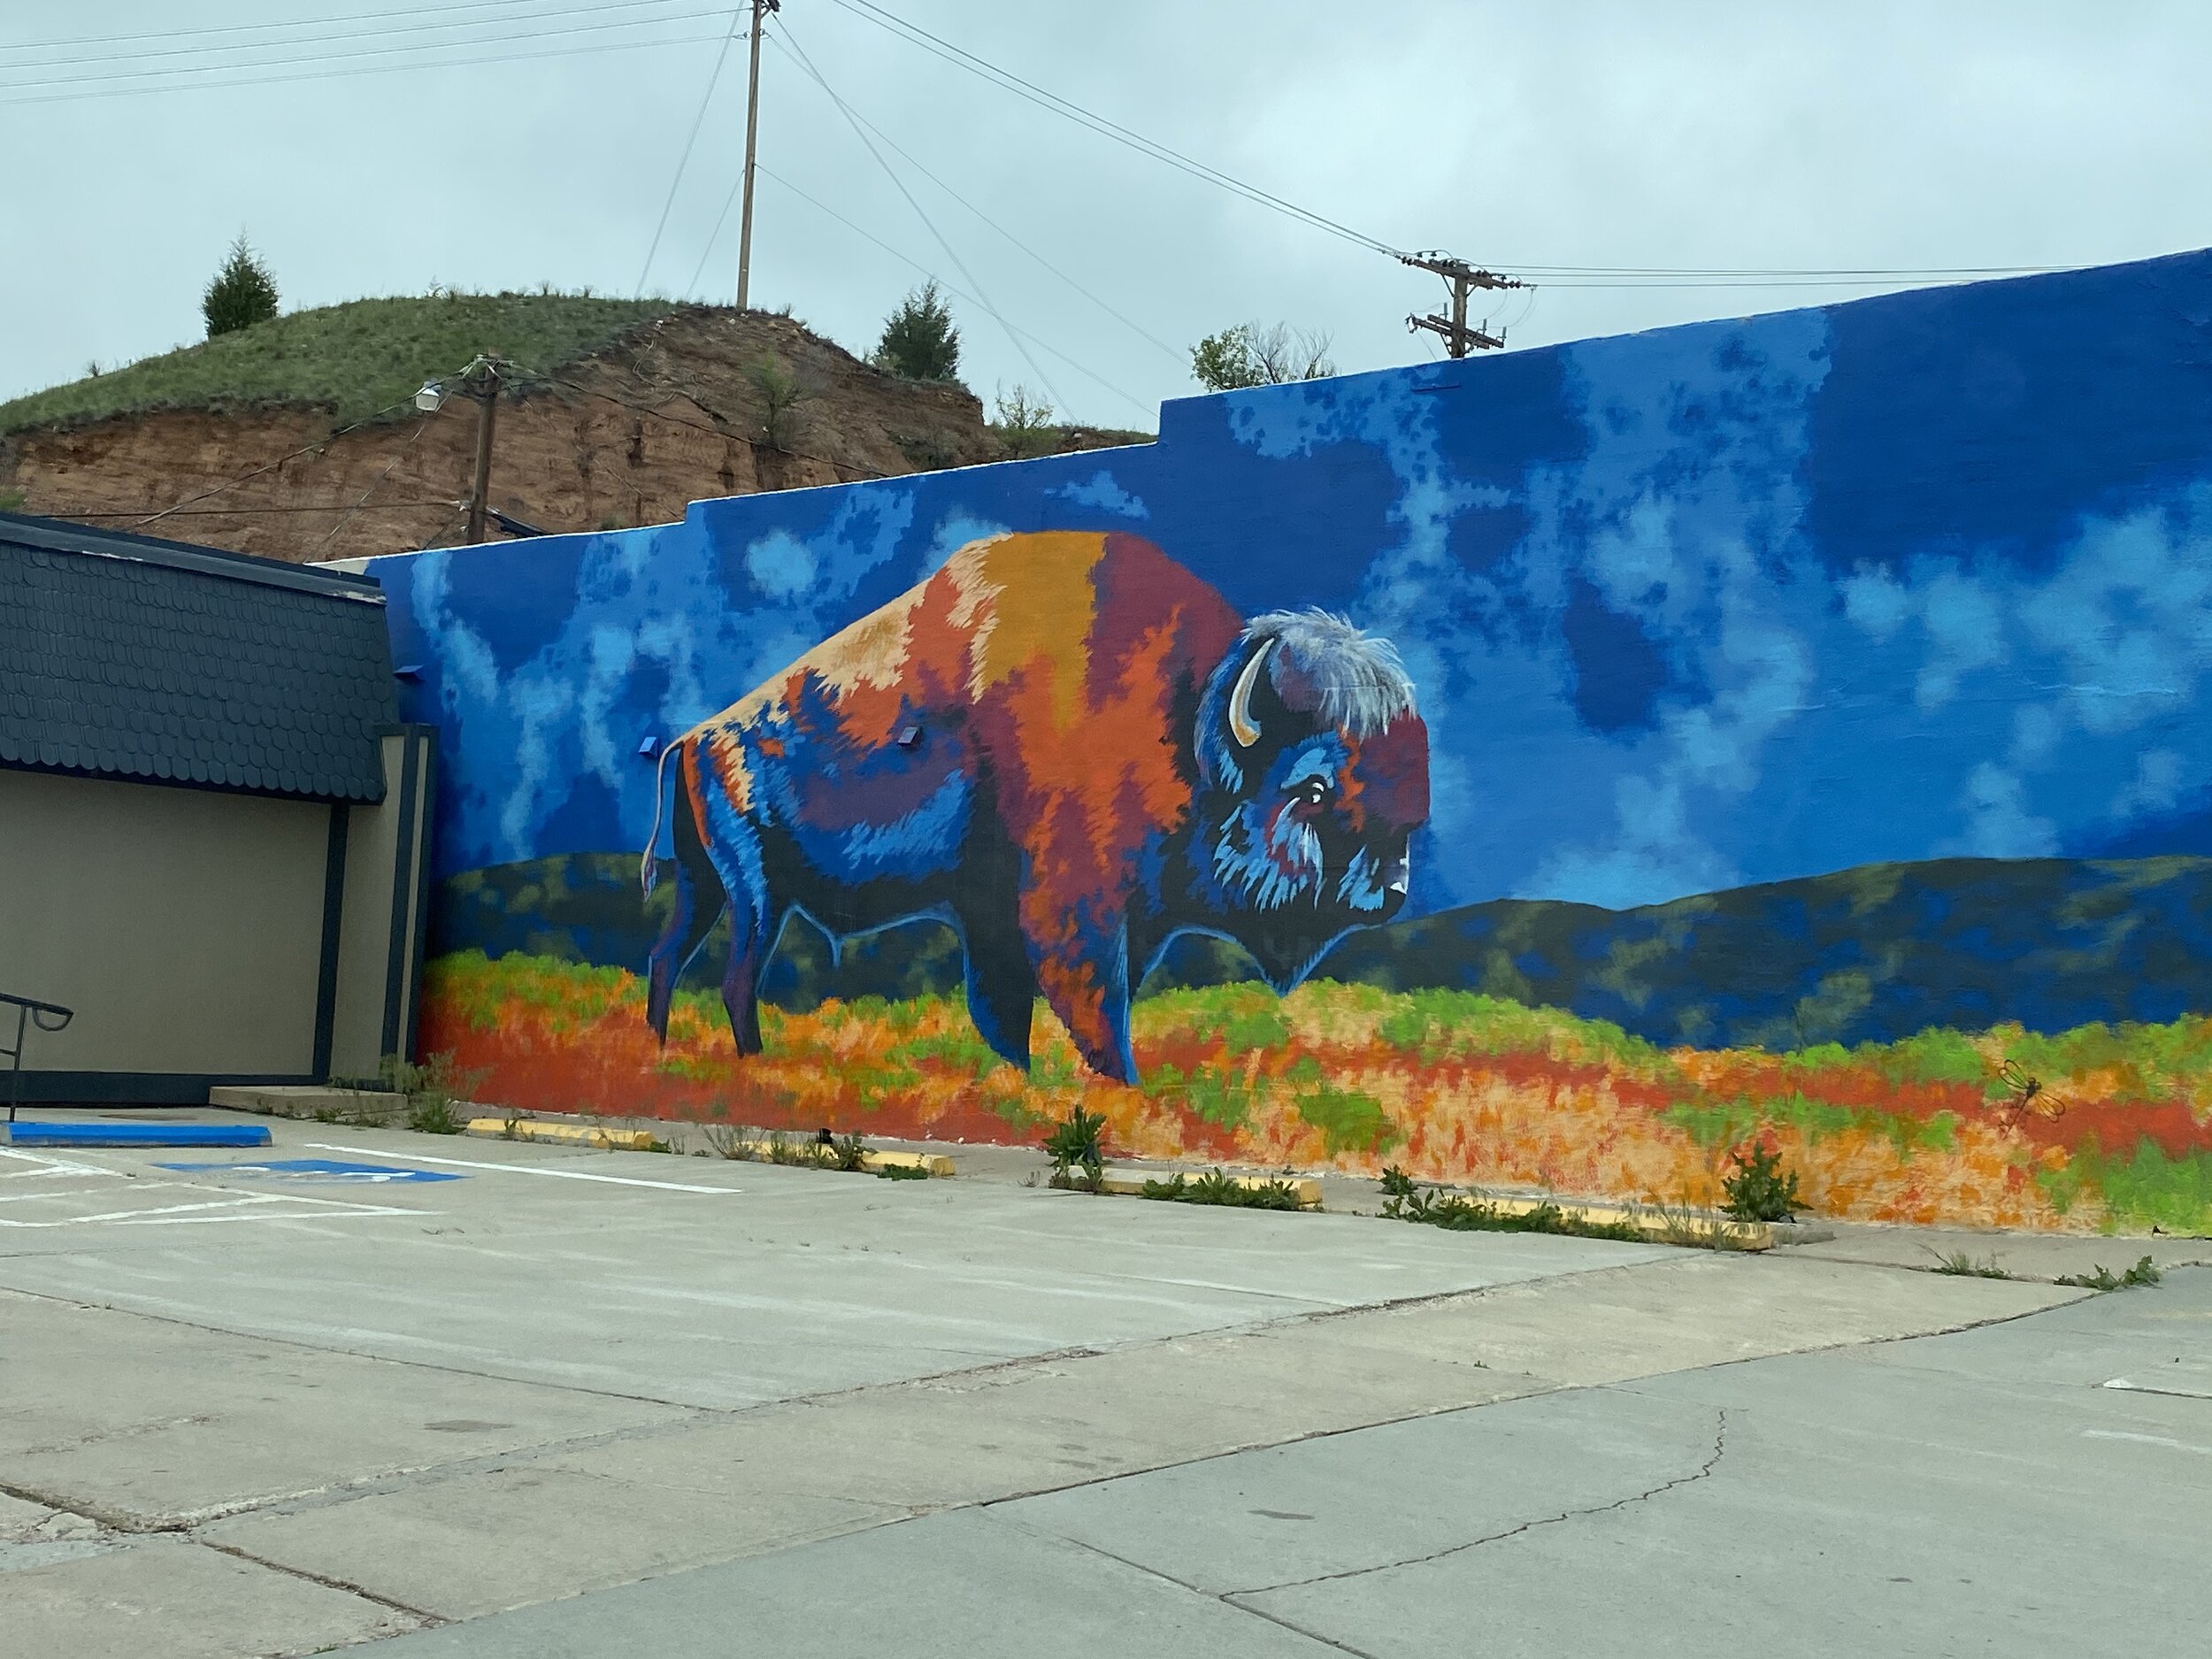 Amazing bison mural in Hot Springs, SD.  Photo by Karen Boudreaux 5/27/21